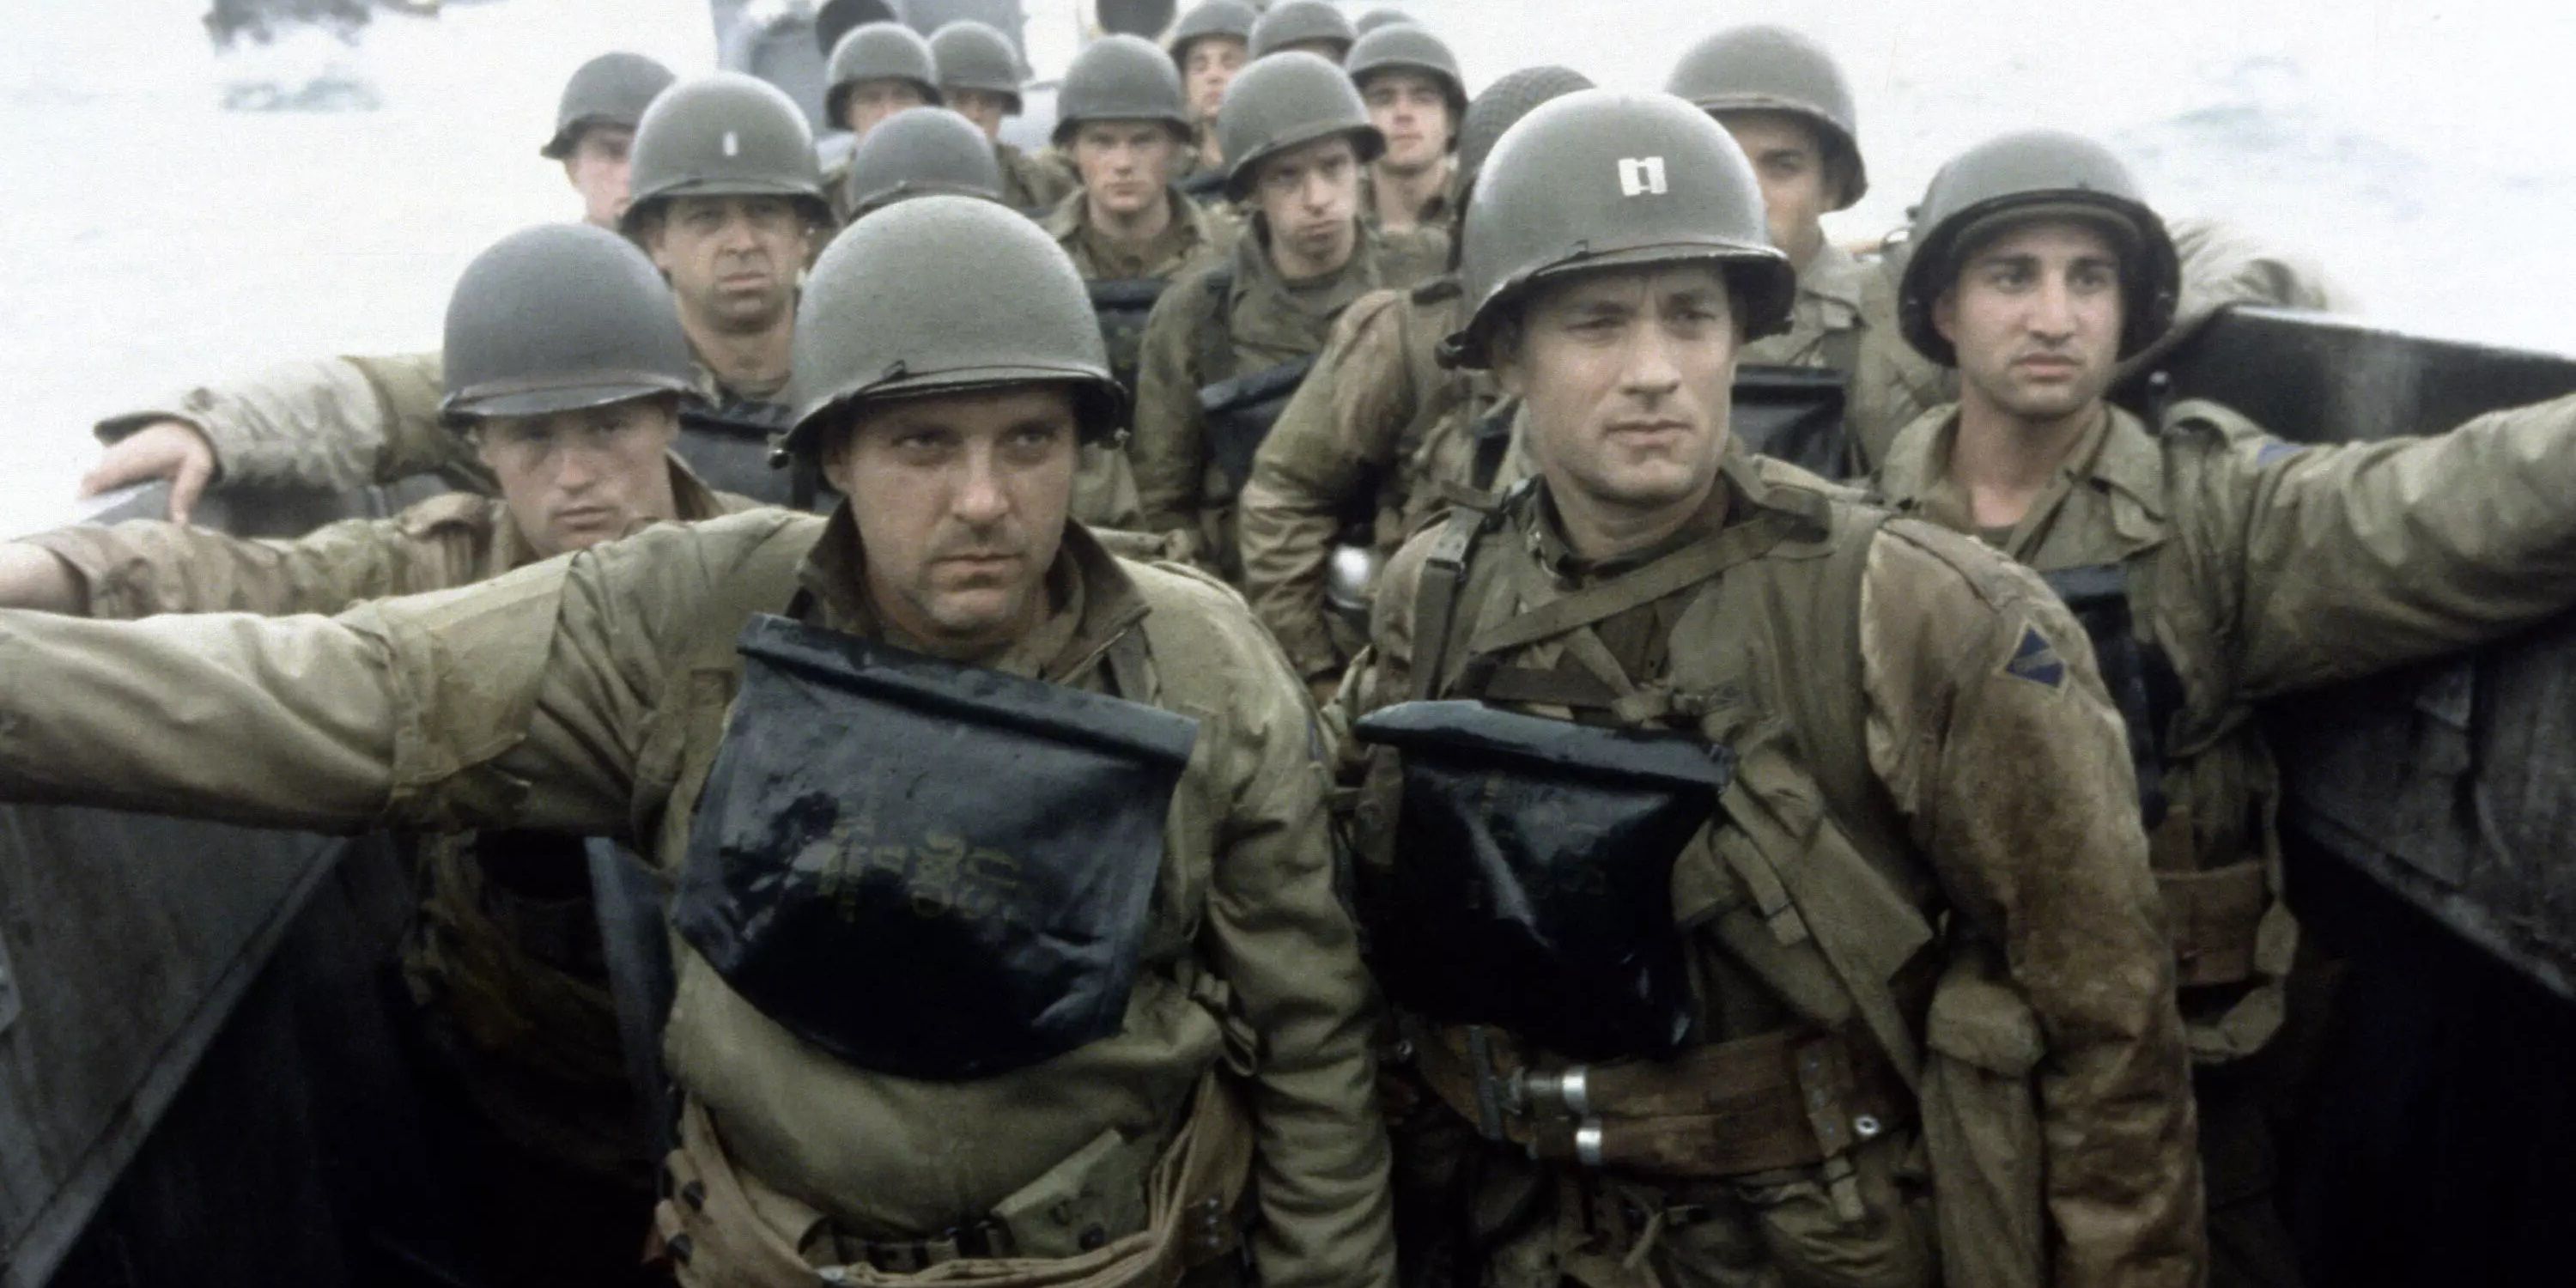 The soldiers arrive on the beaches of Normandy in Saving Private Ryan